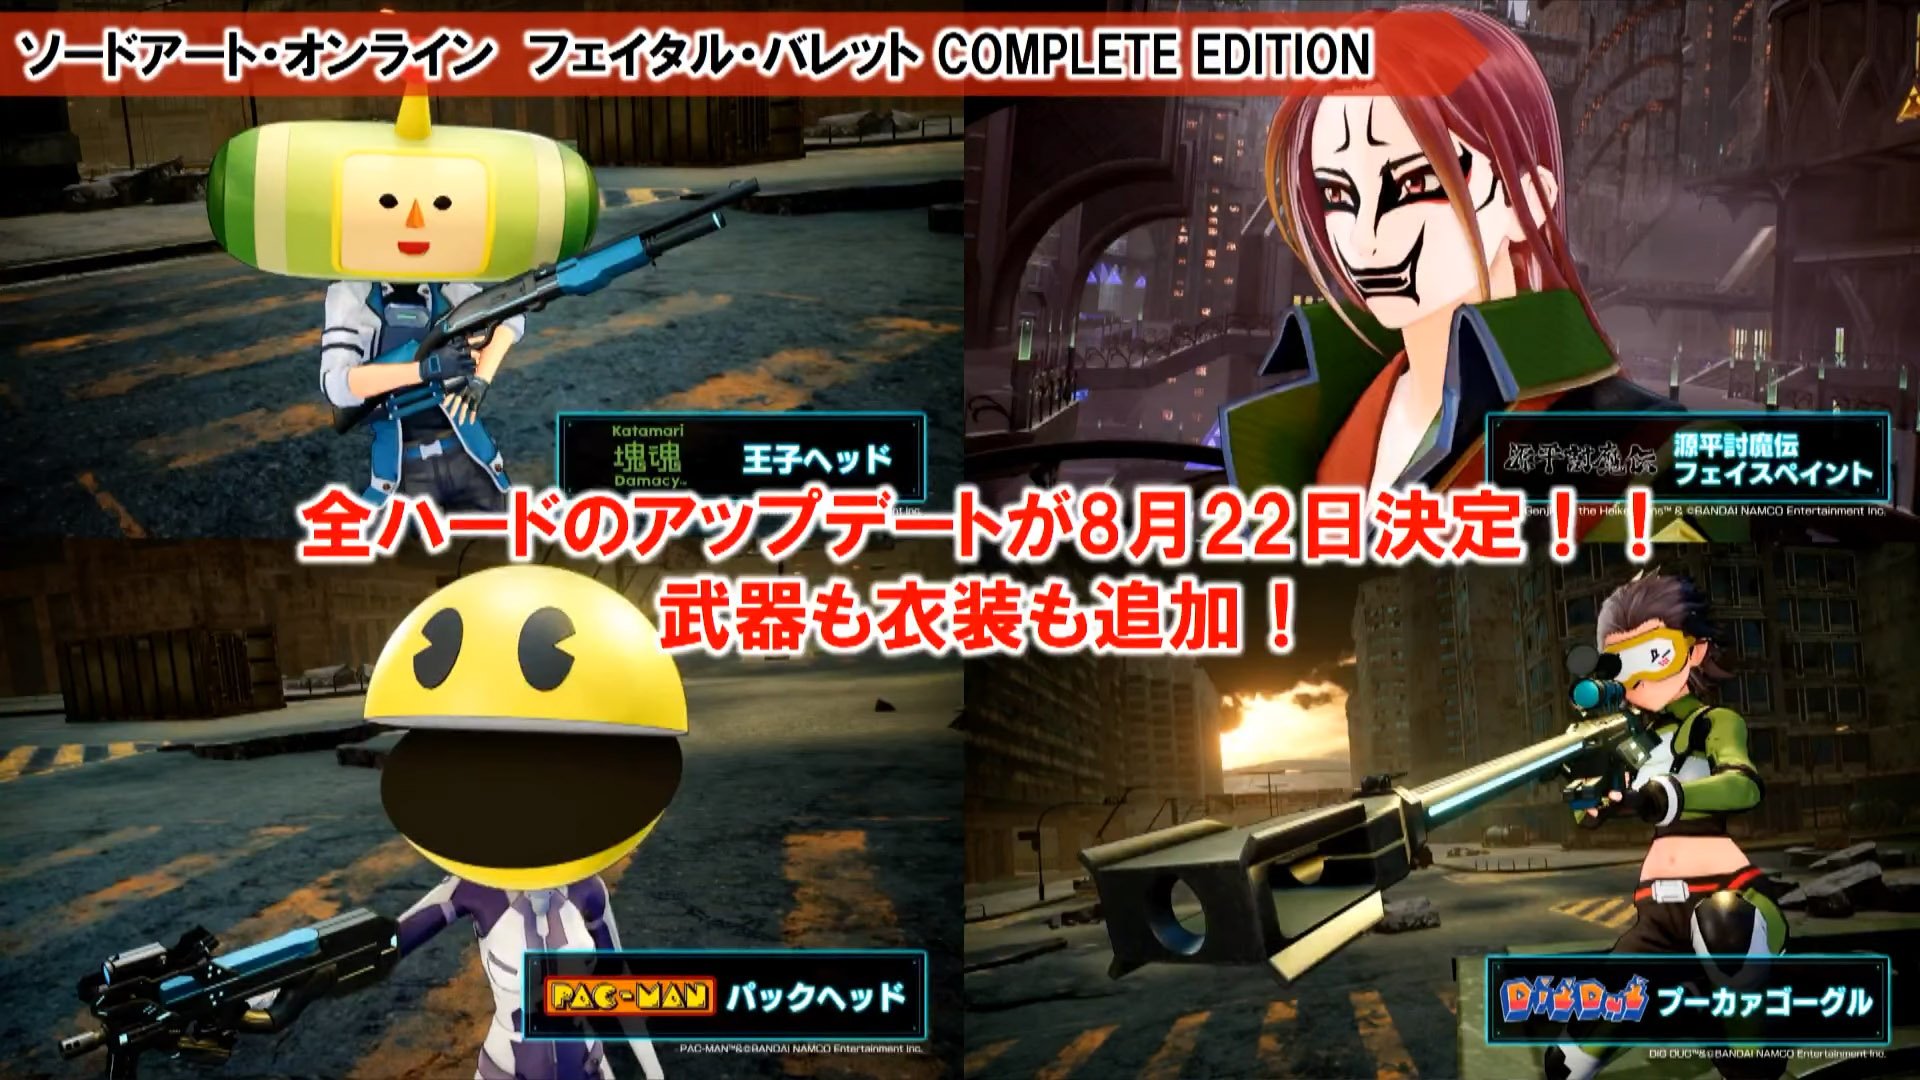 Sword Art Online Fatal Bullet Update To Add New Weapons And Costumes On August 22 Further Updates Planned Gematsu